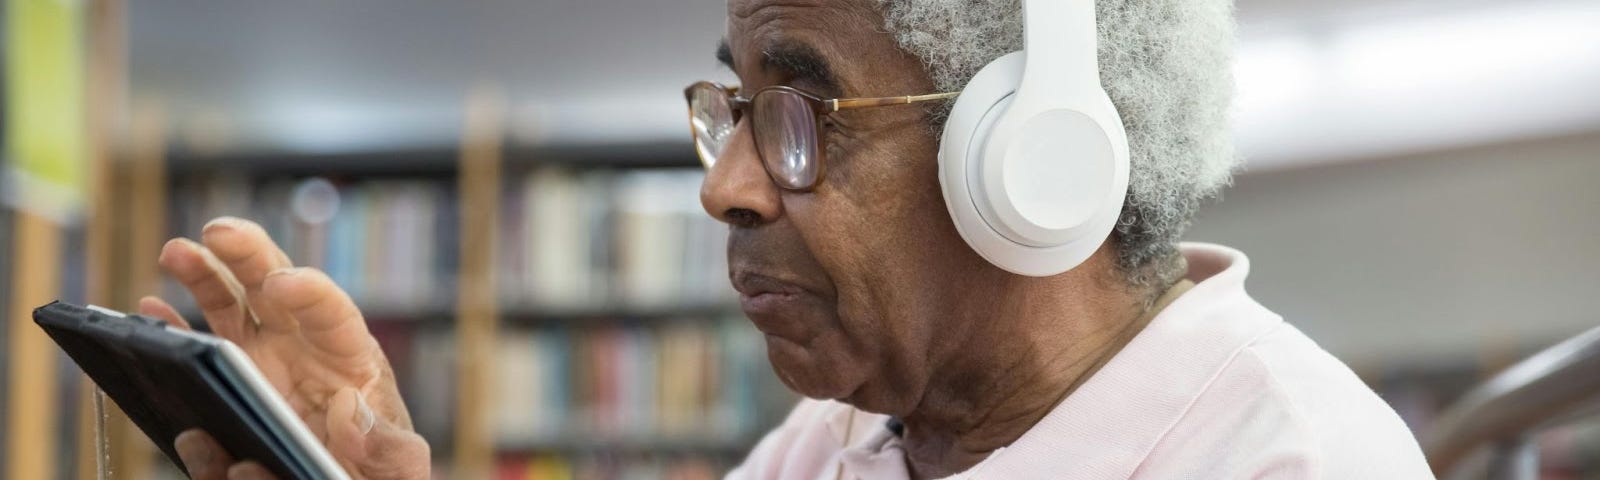 An elderly man with white hair and dark complexion wearing earphones navigate his fingers across an electronic tablet